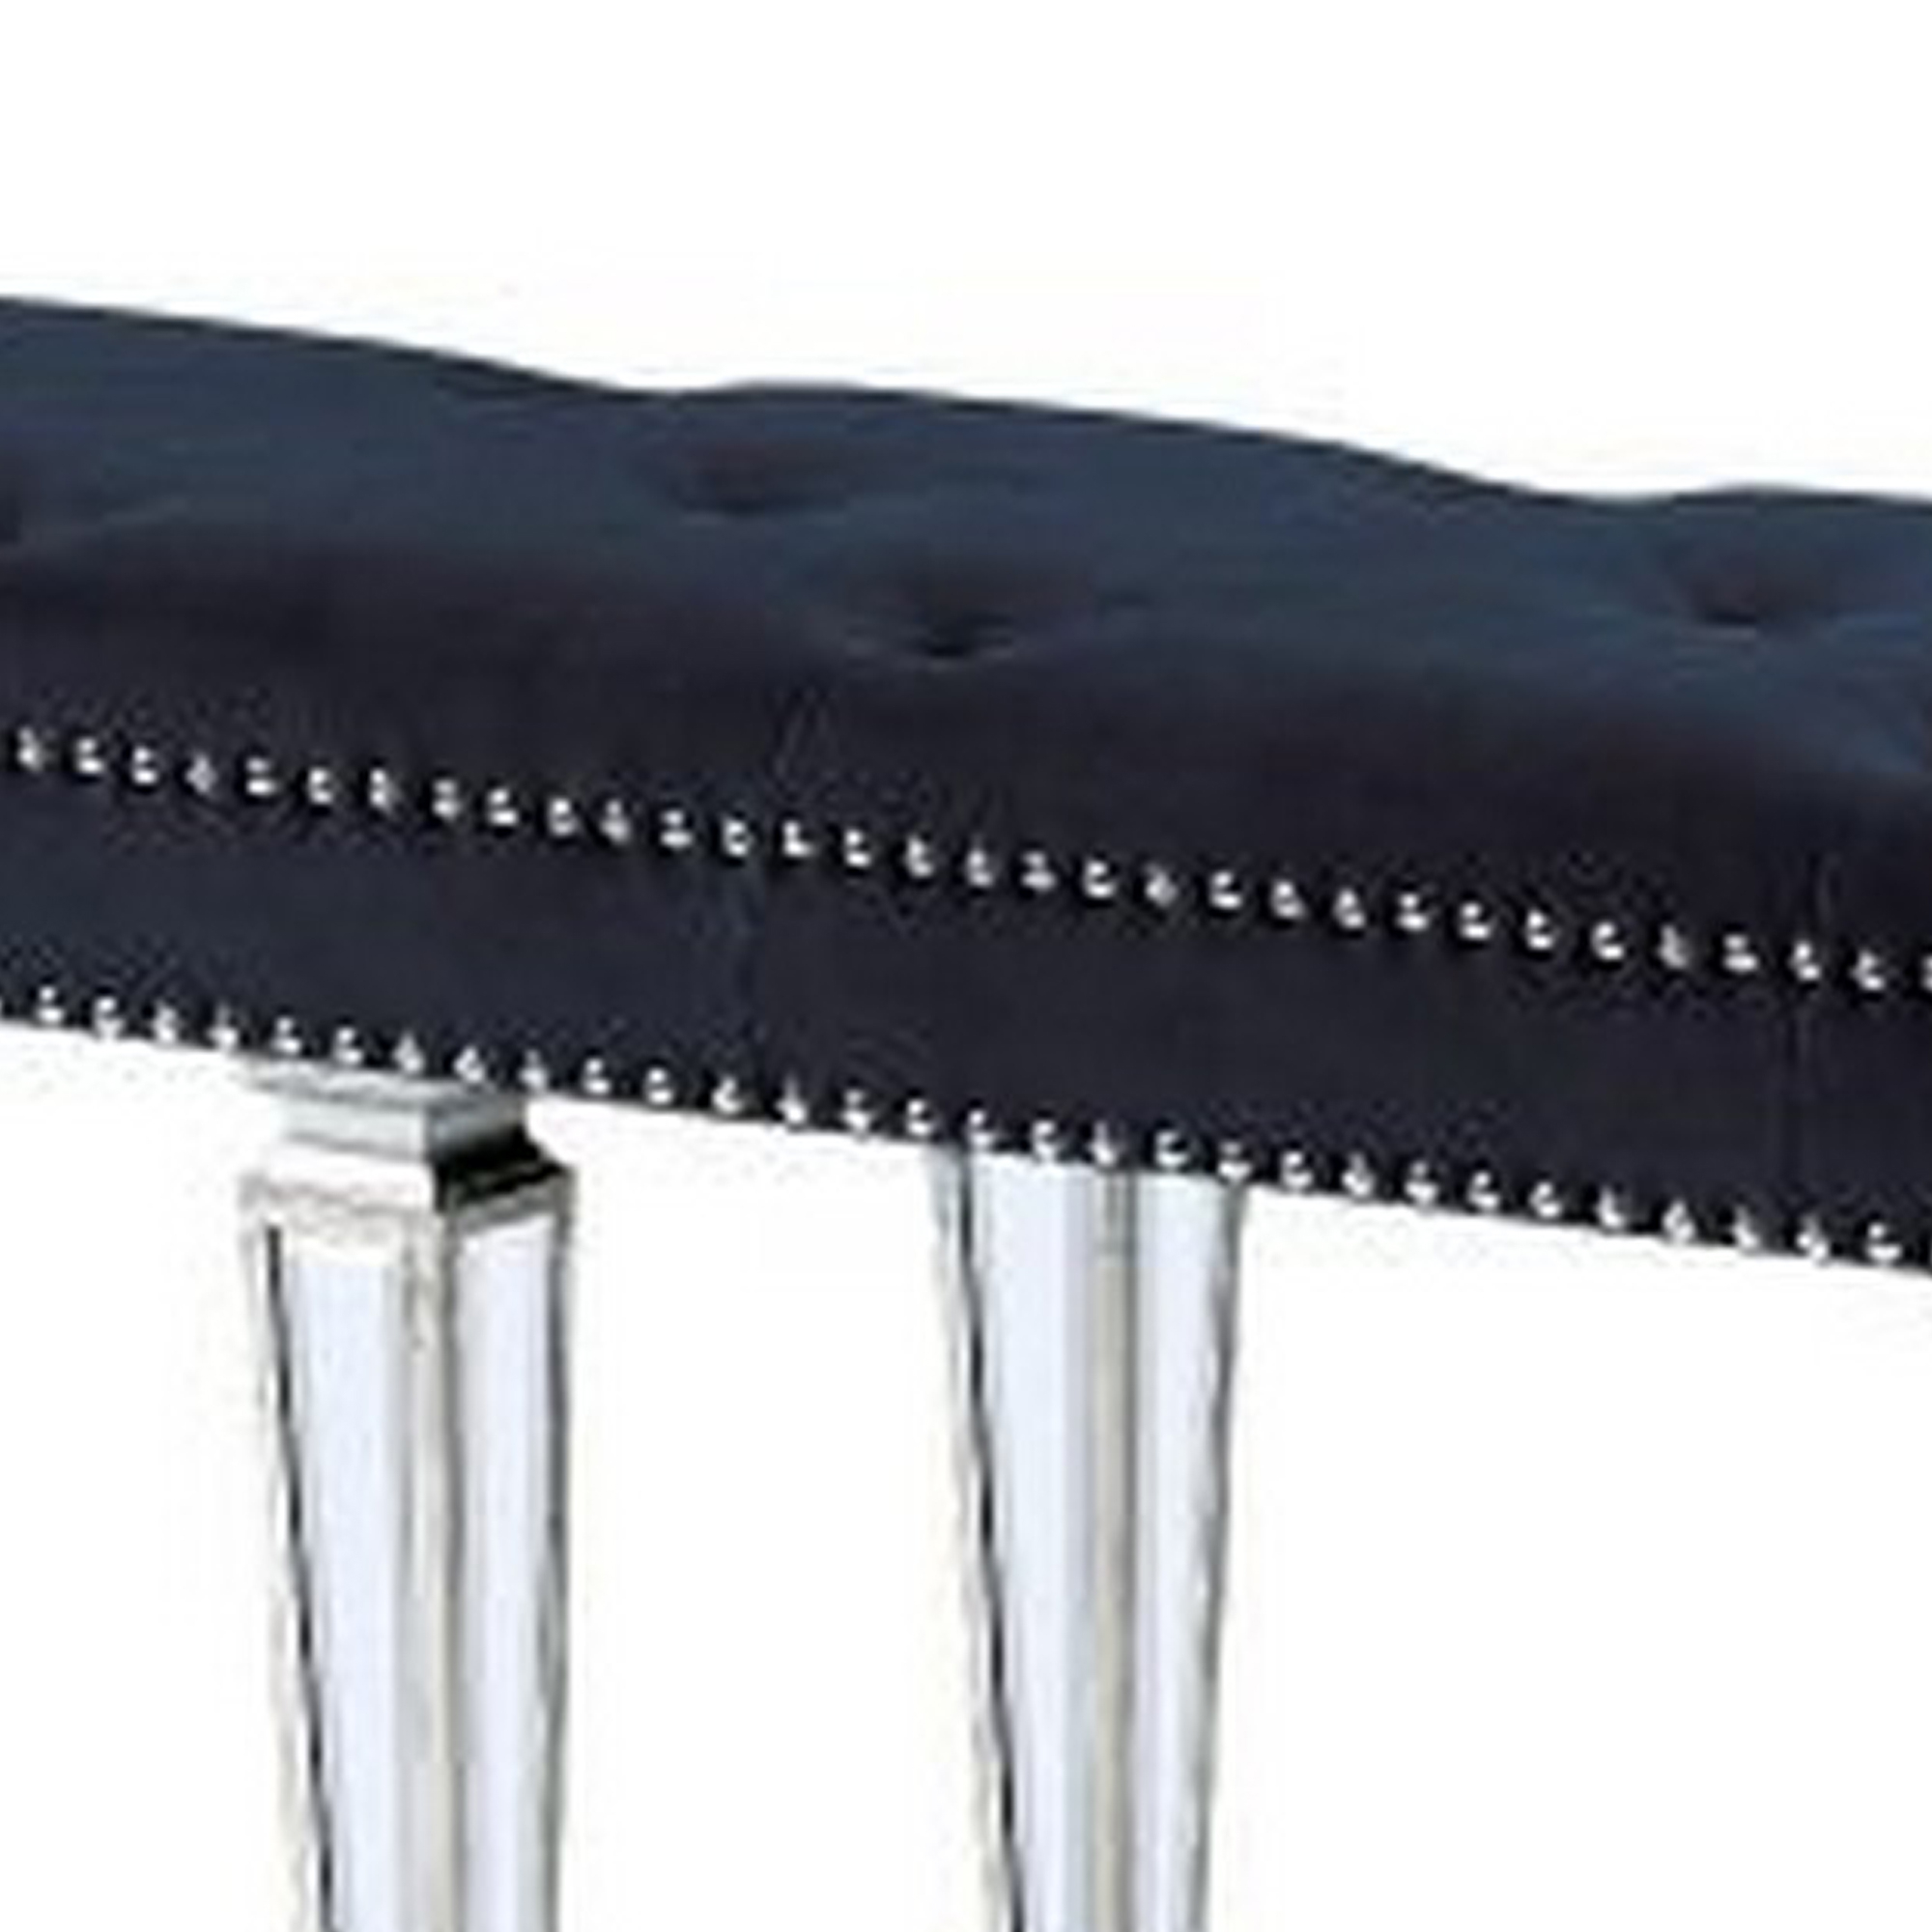 Accent Bench With Tufted Velvet Seat And Mirrored Legs, Black- Saltoro Sherpi